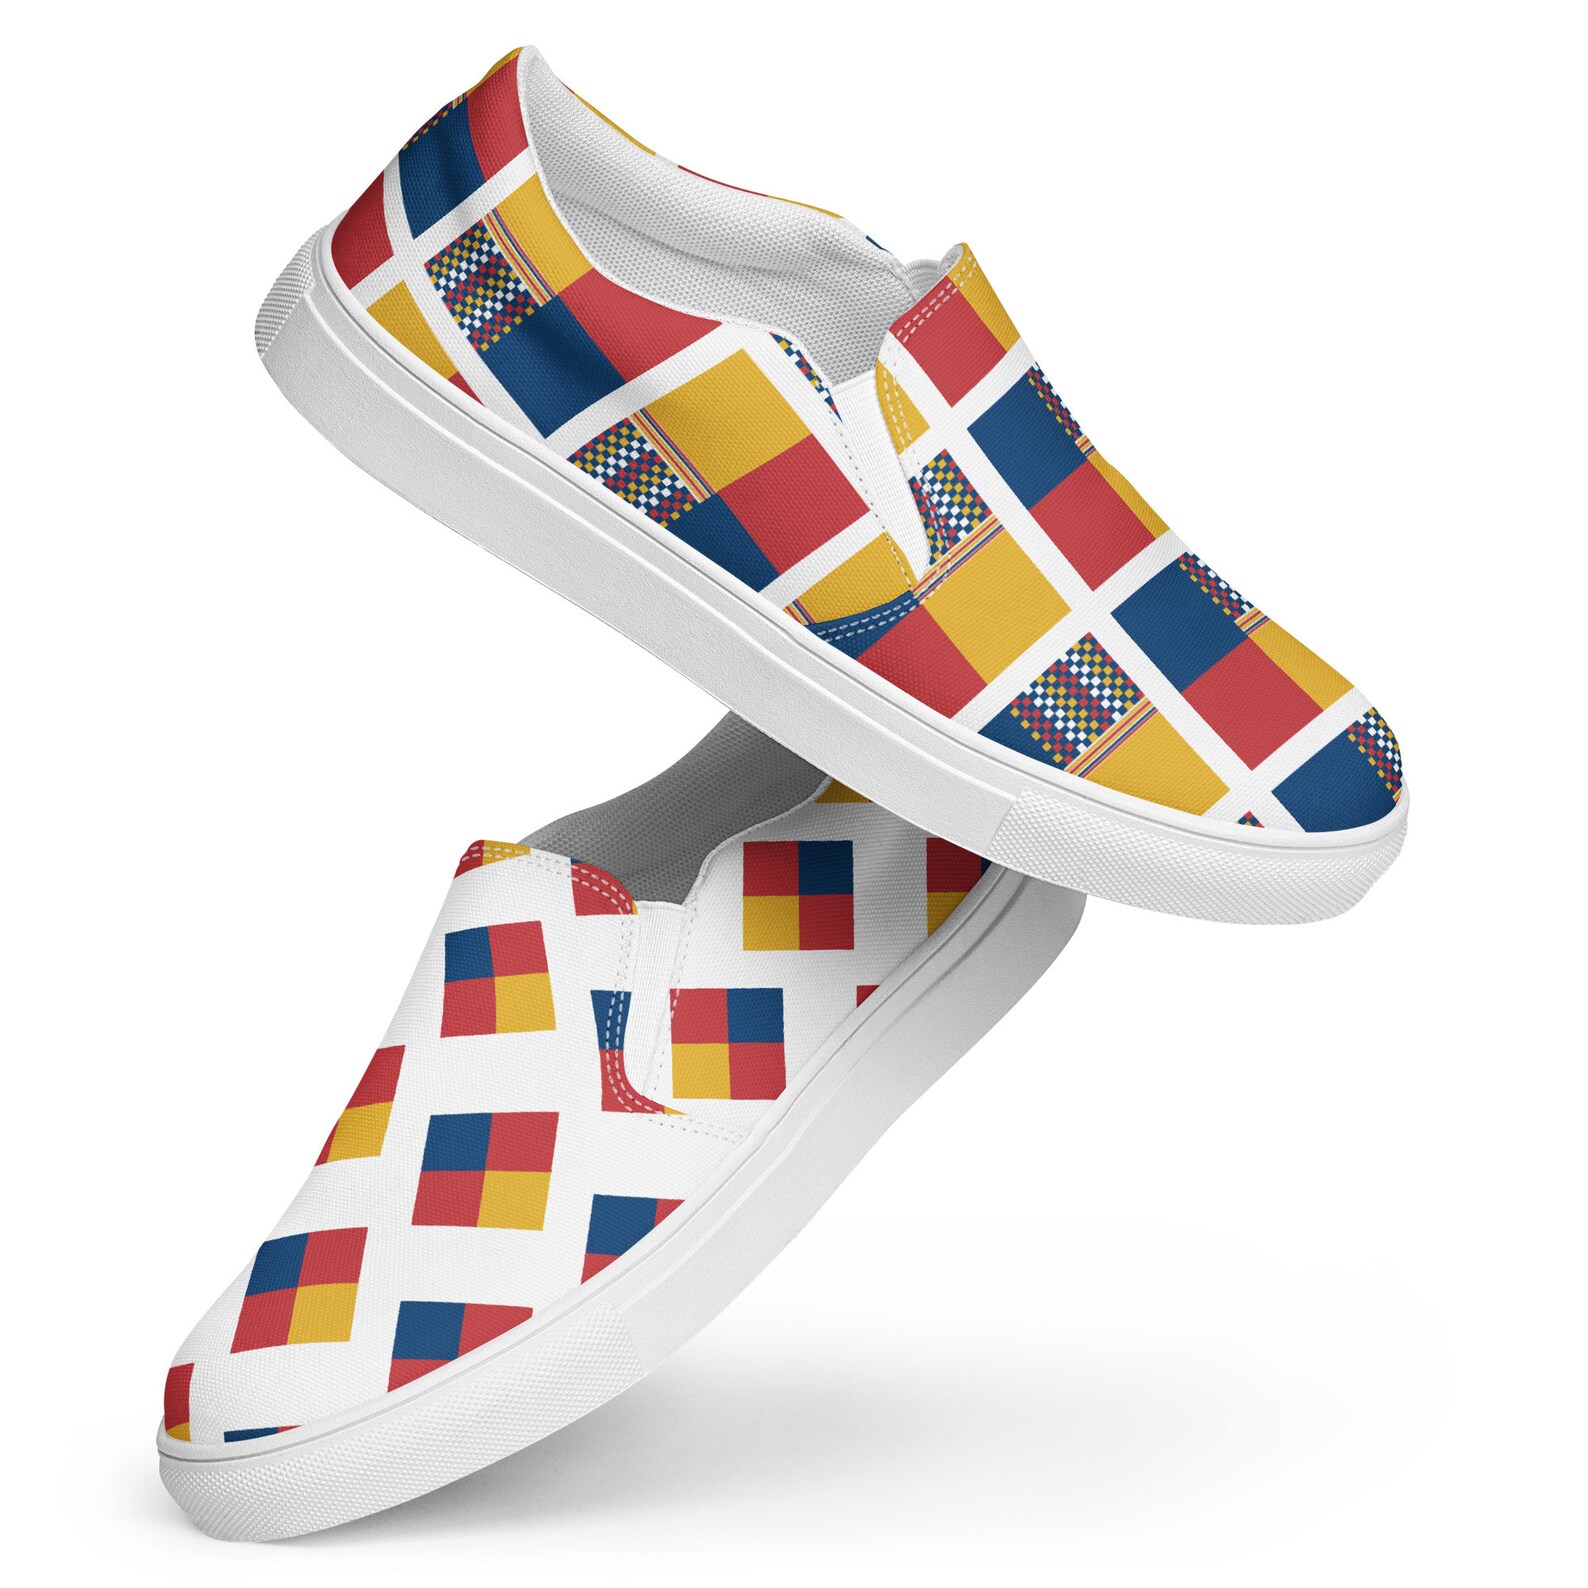 The "SerbiaSquares" are Women Canvas Slip On Shoes in the 2024 ACVK shoe line that make good volleyball gifts for volleyball coaches and players who are creatives who like to wear unpredictable patterns and designs off the court with their street or workout wear.